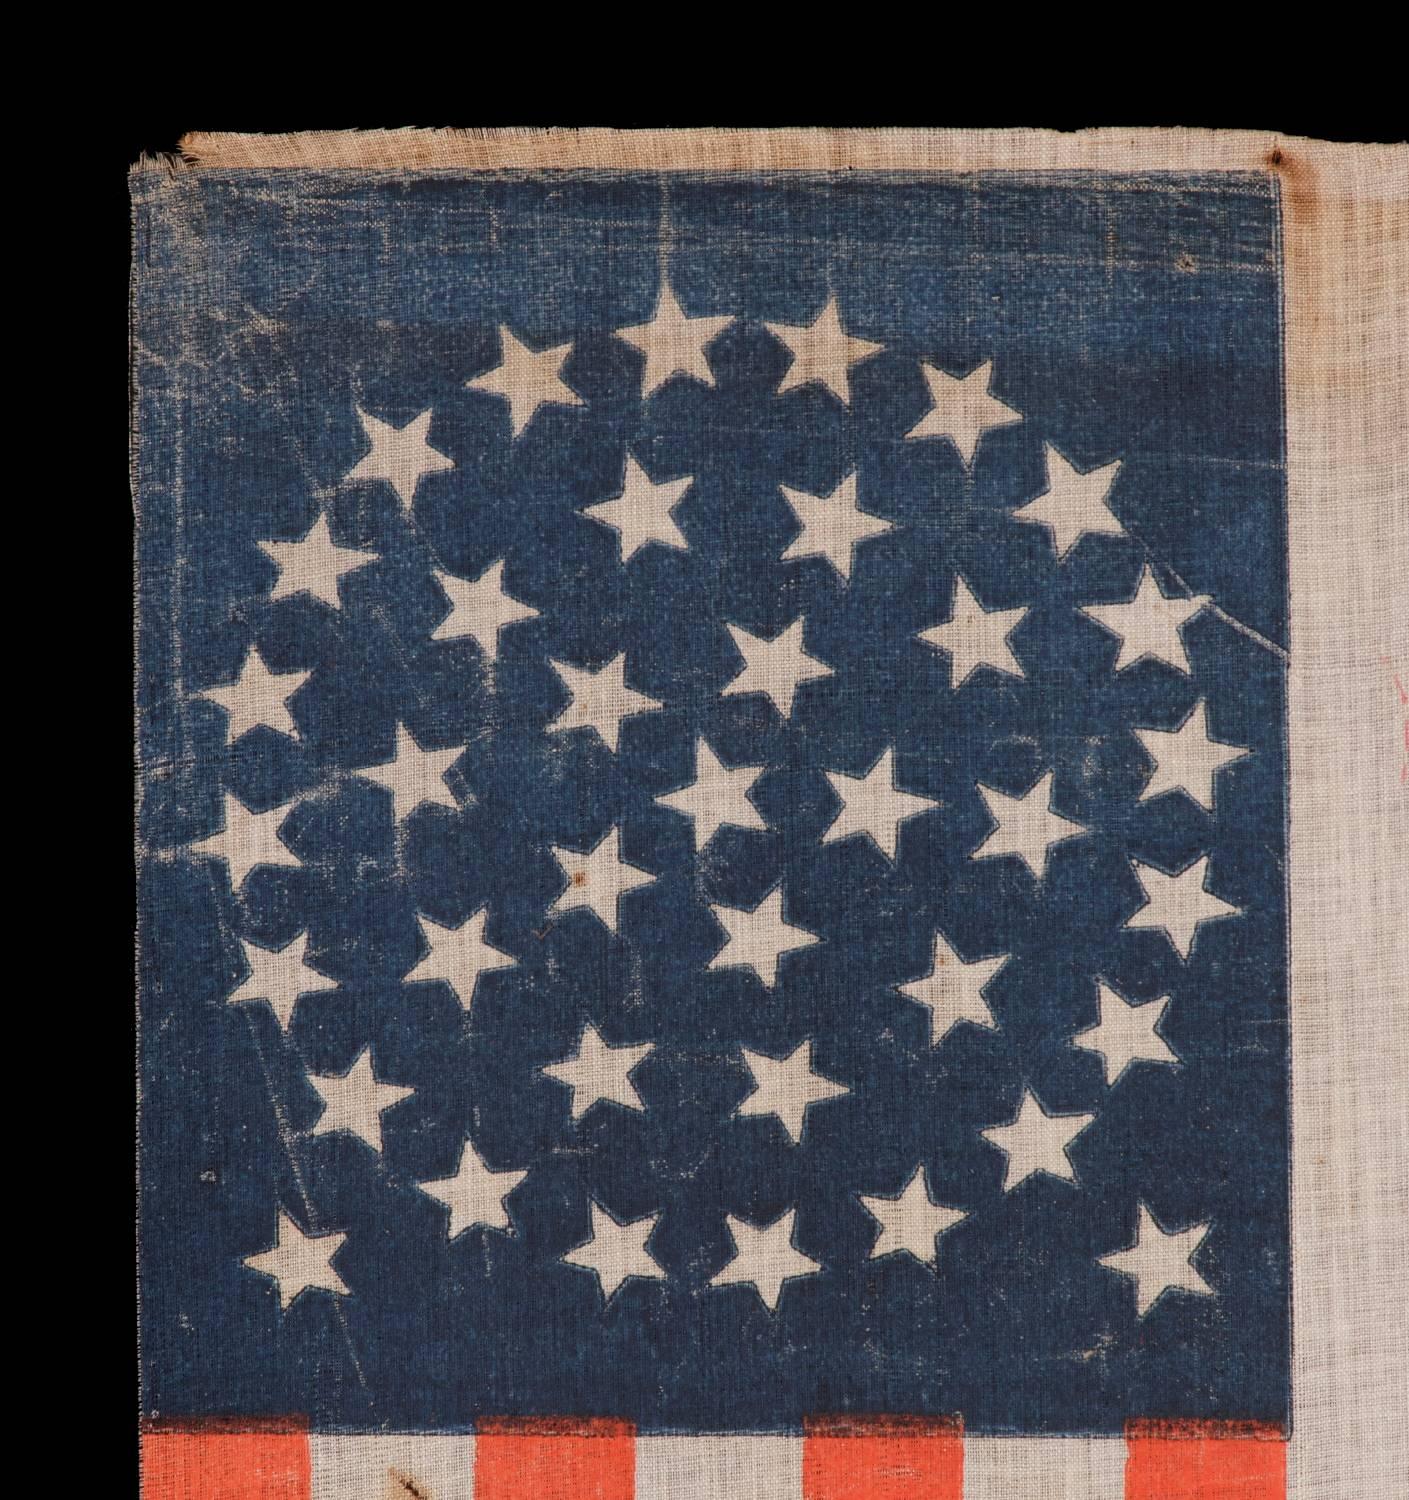 American 38 Star Flag with Stars in a Beautiful Medallion Configuration with Two Outliers